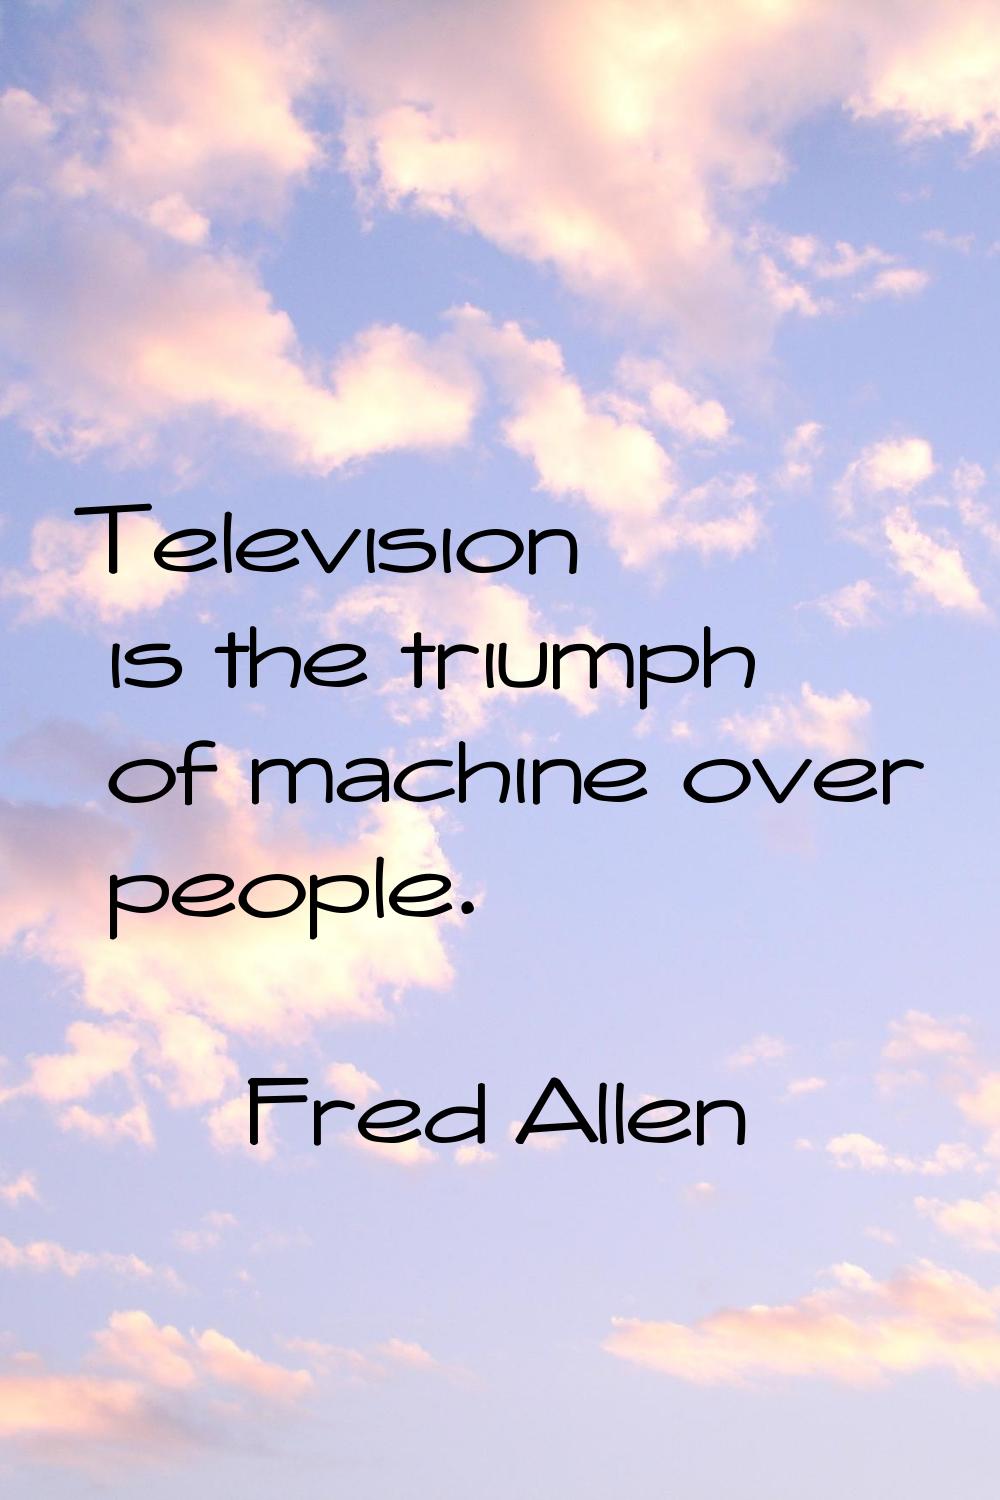 Television is the triumph of machine over people.